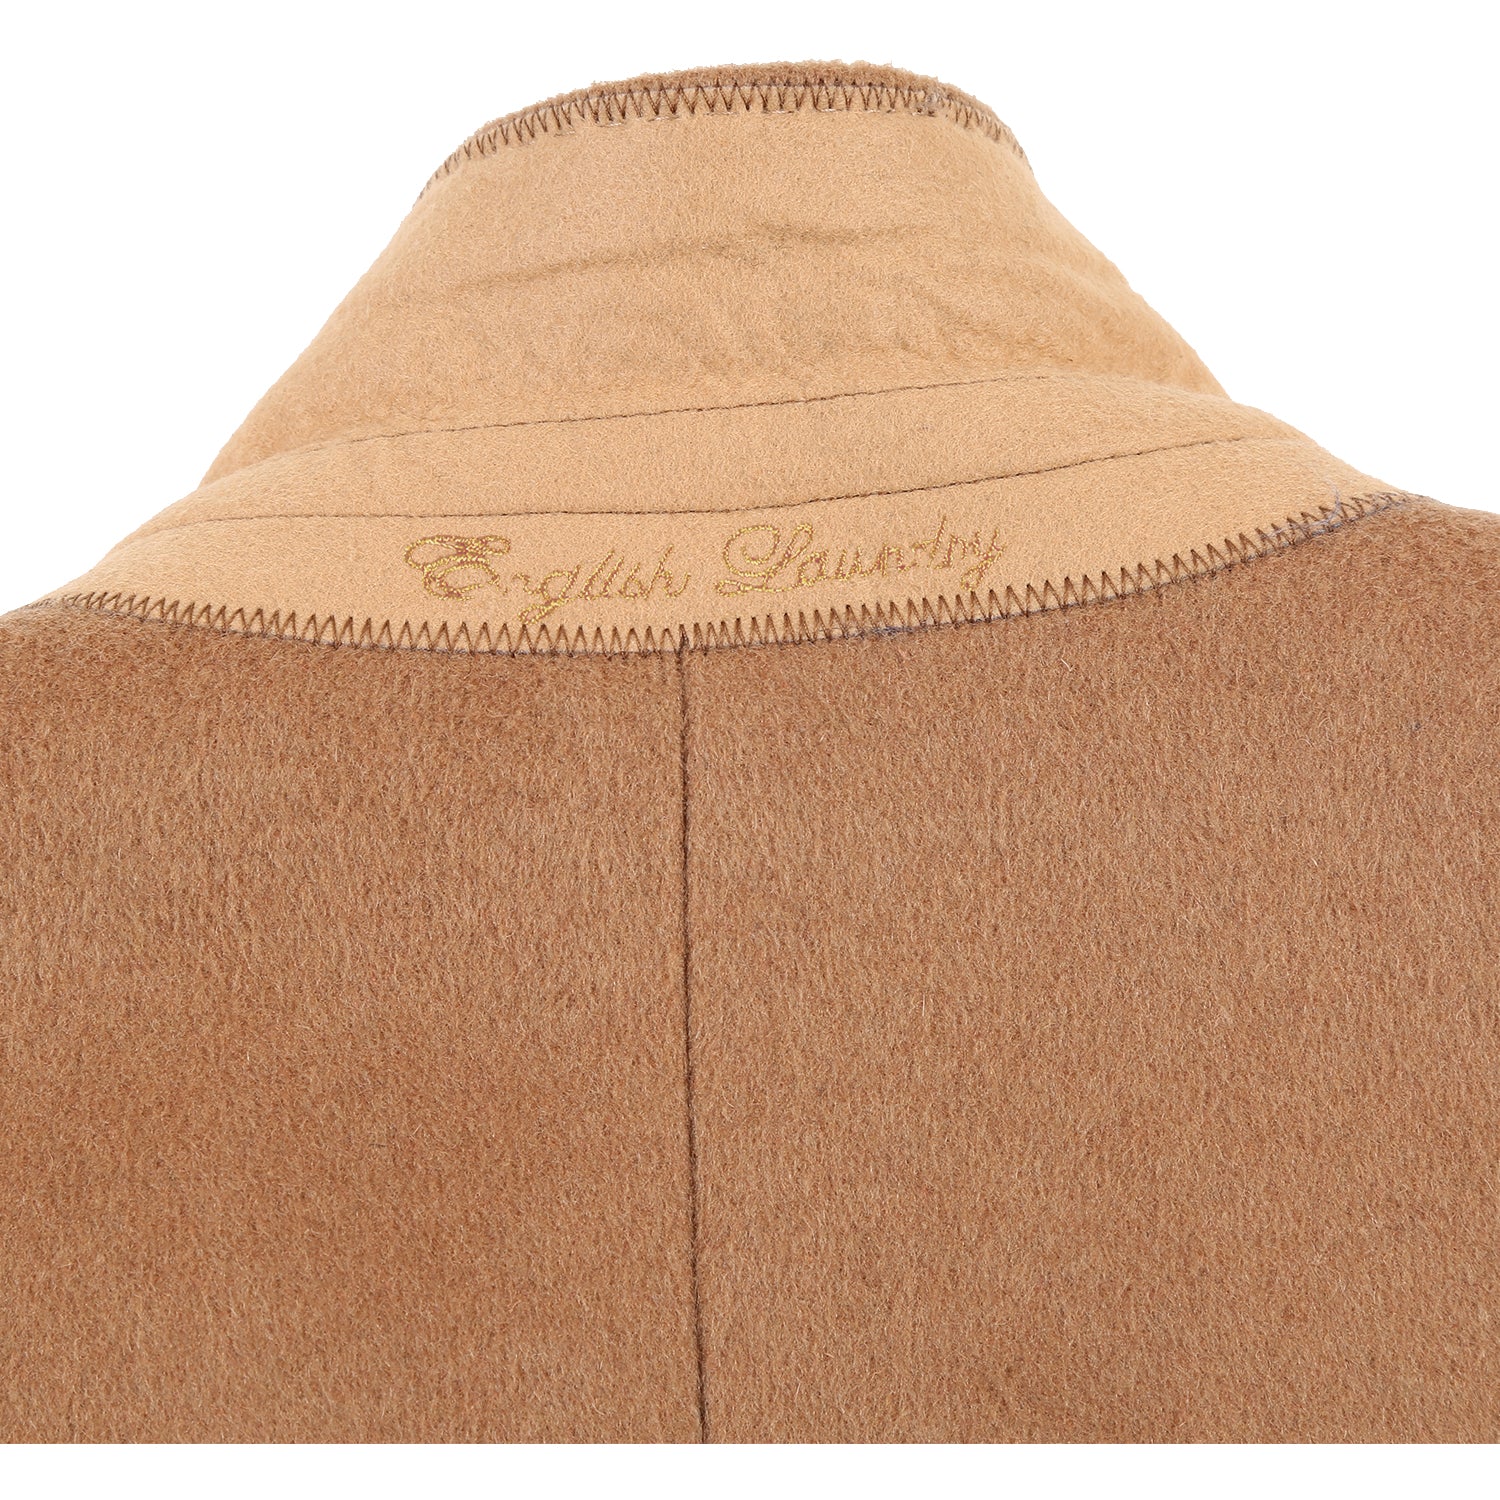 English Laundry Wool Blend Breasted Camel Top Coat 4